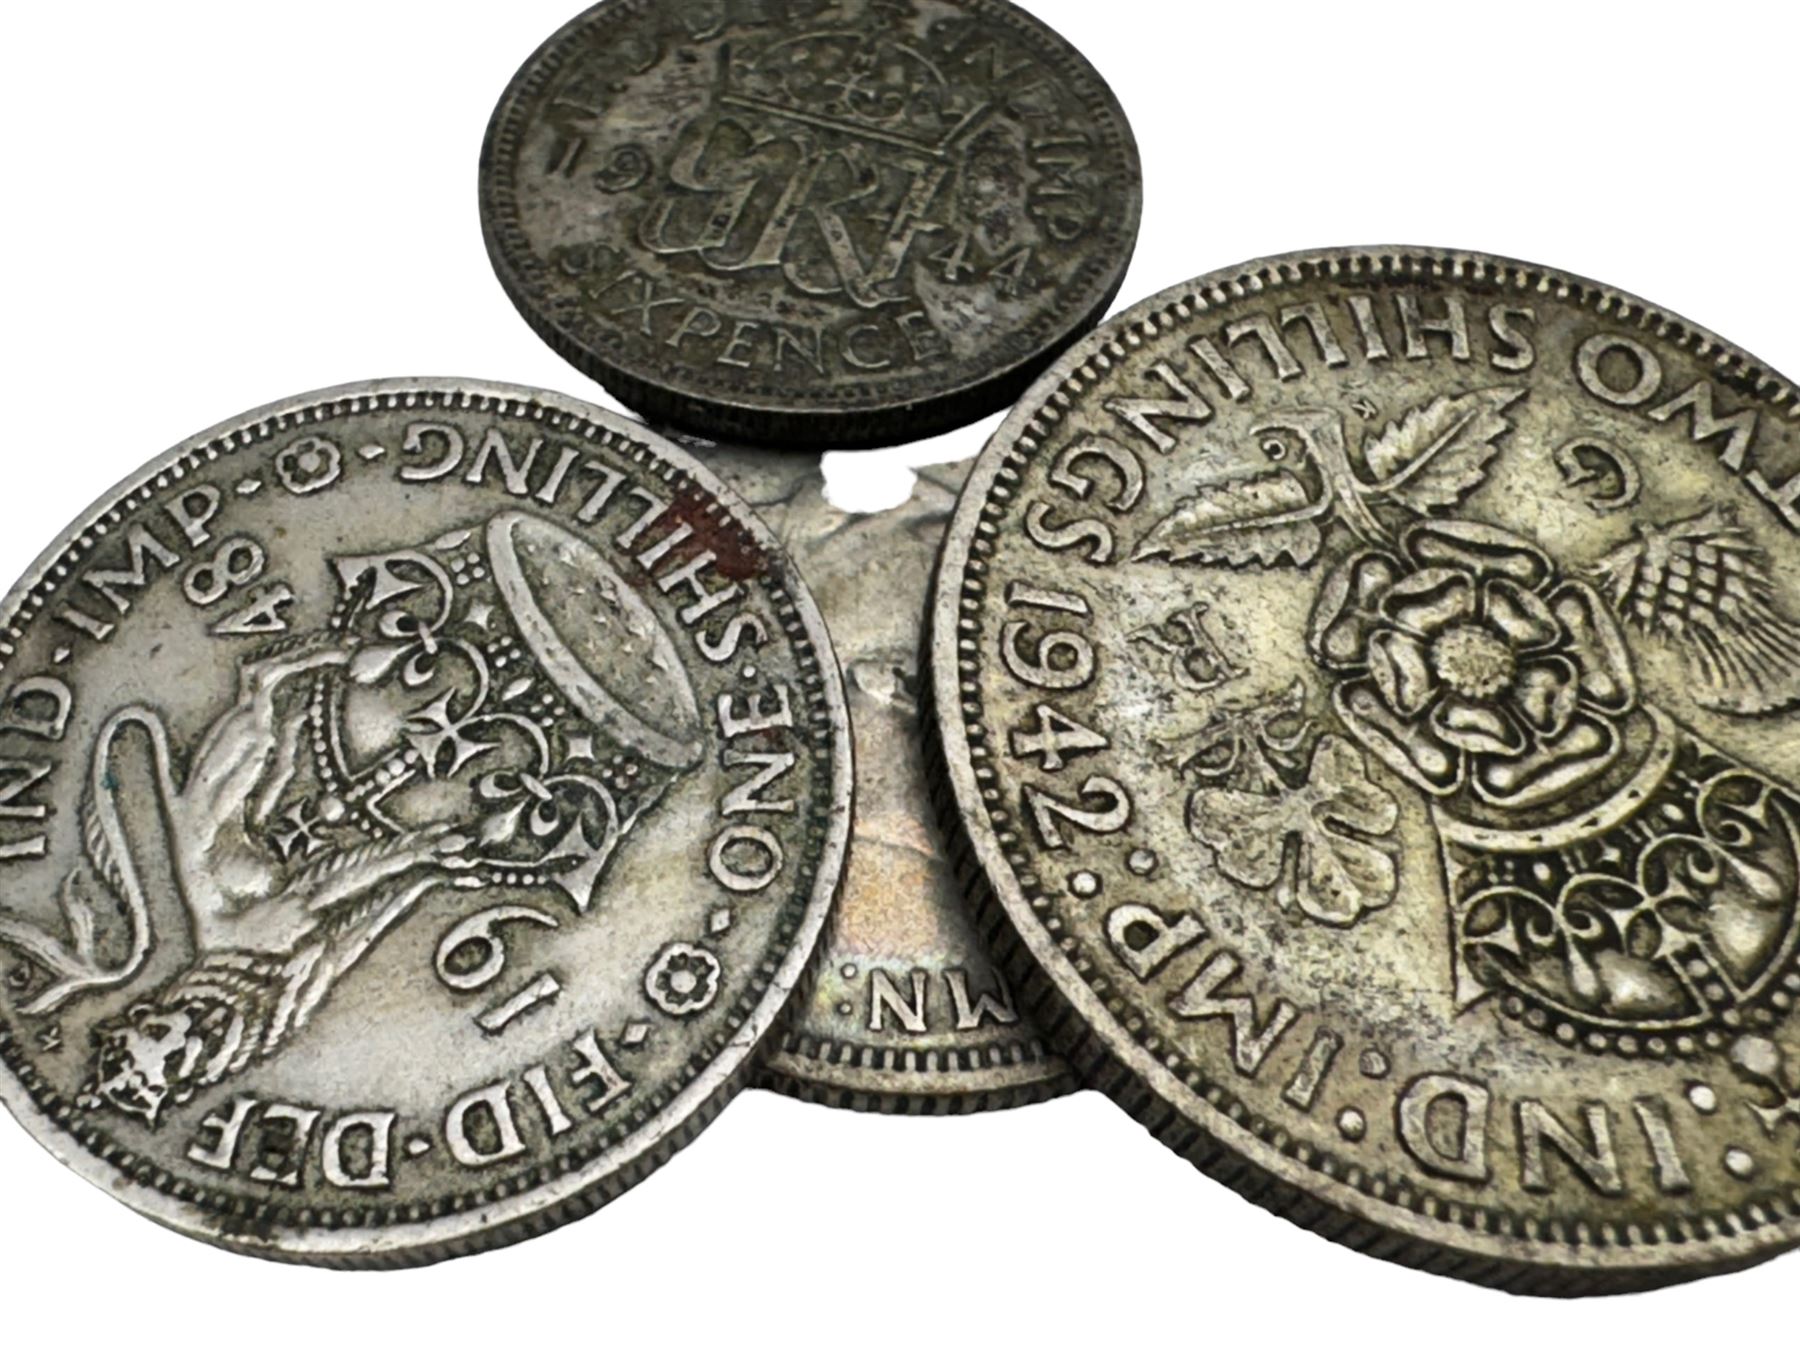 Coins including Elizabeth I 1573 sixpence and other hammered silver coins - Image 5 of 11